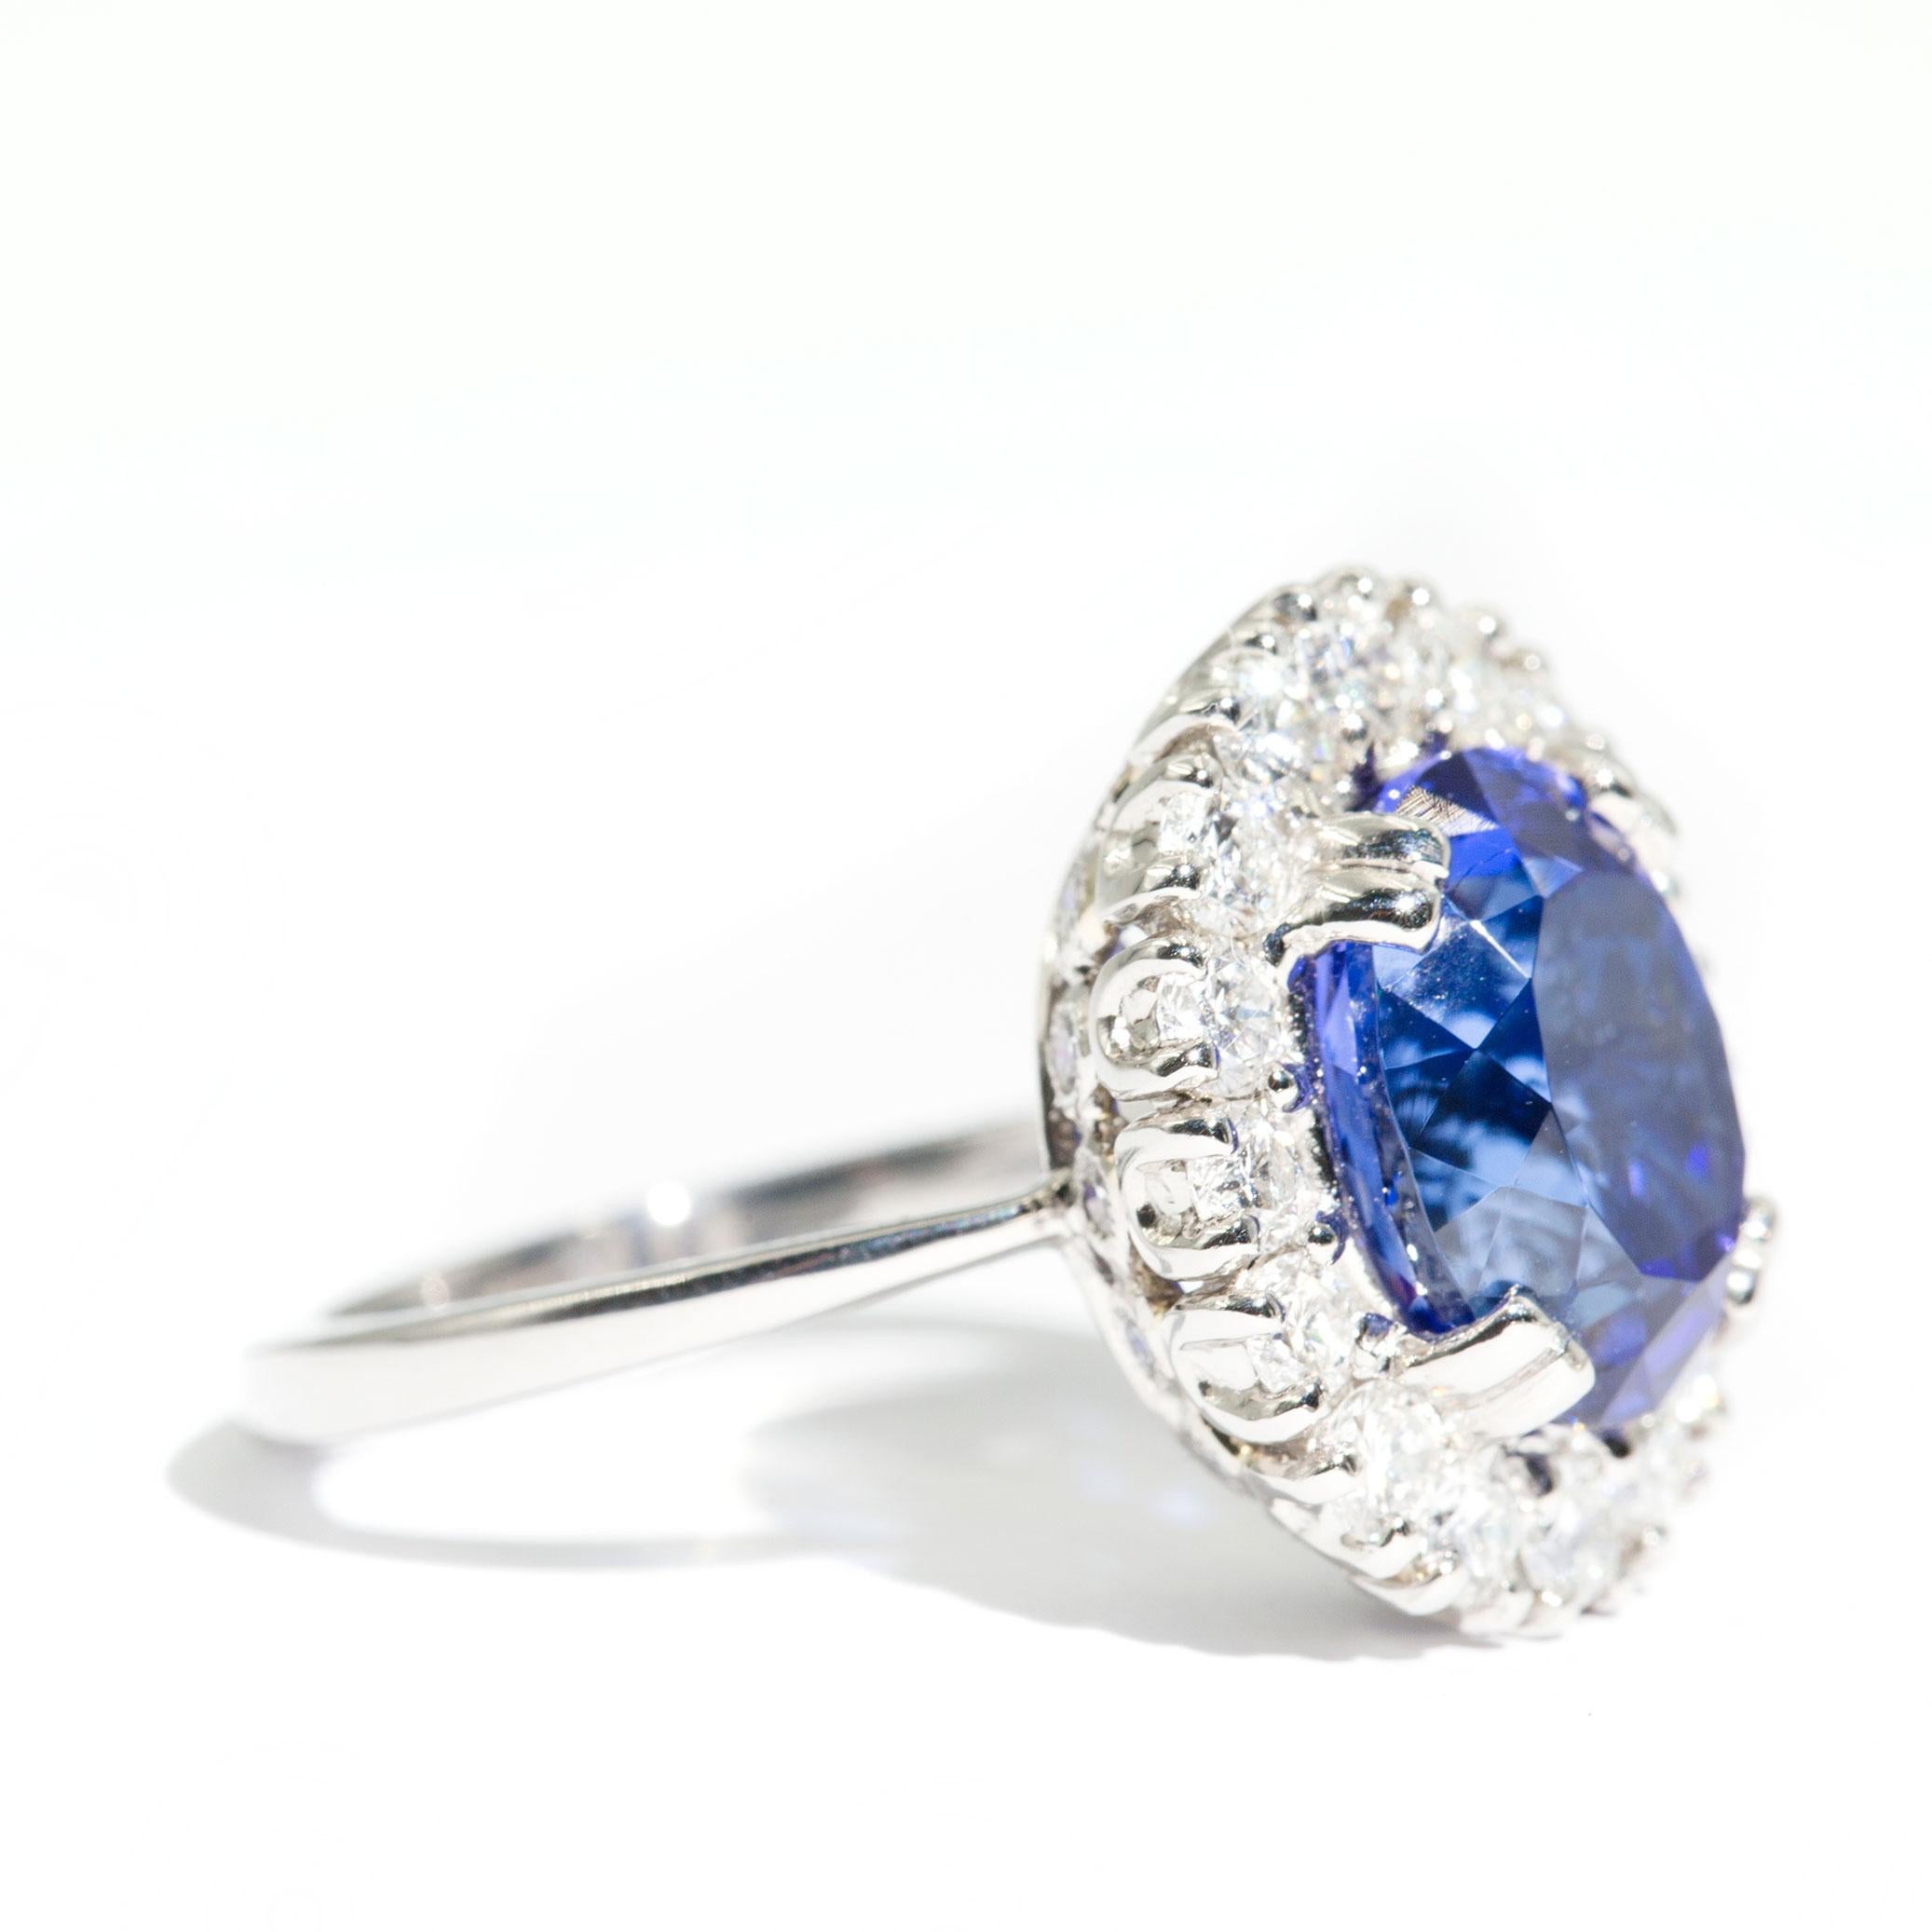 Contemporary 6.47 Carat Oval Flawless Tanzanite and 1.51 Carat Diamond Platinum Cocktail Ring For Sale